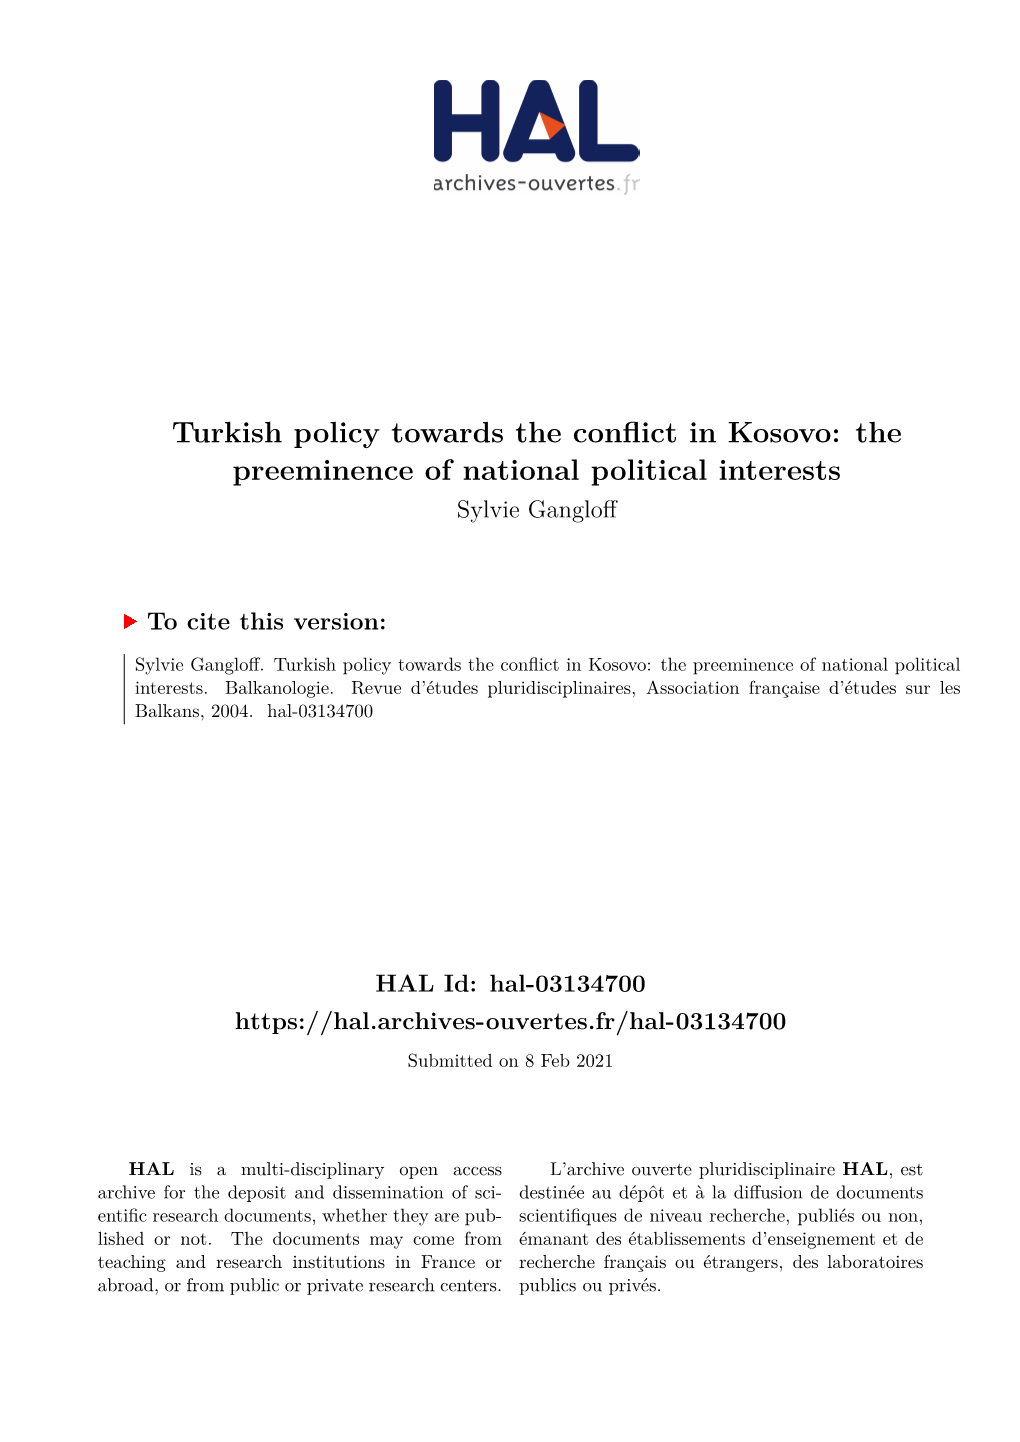 Turkish Policy Towards the Conflict in Kosovo: the Preeminence of National Political Interests Sylvie Gangloff